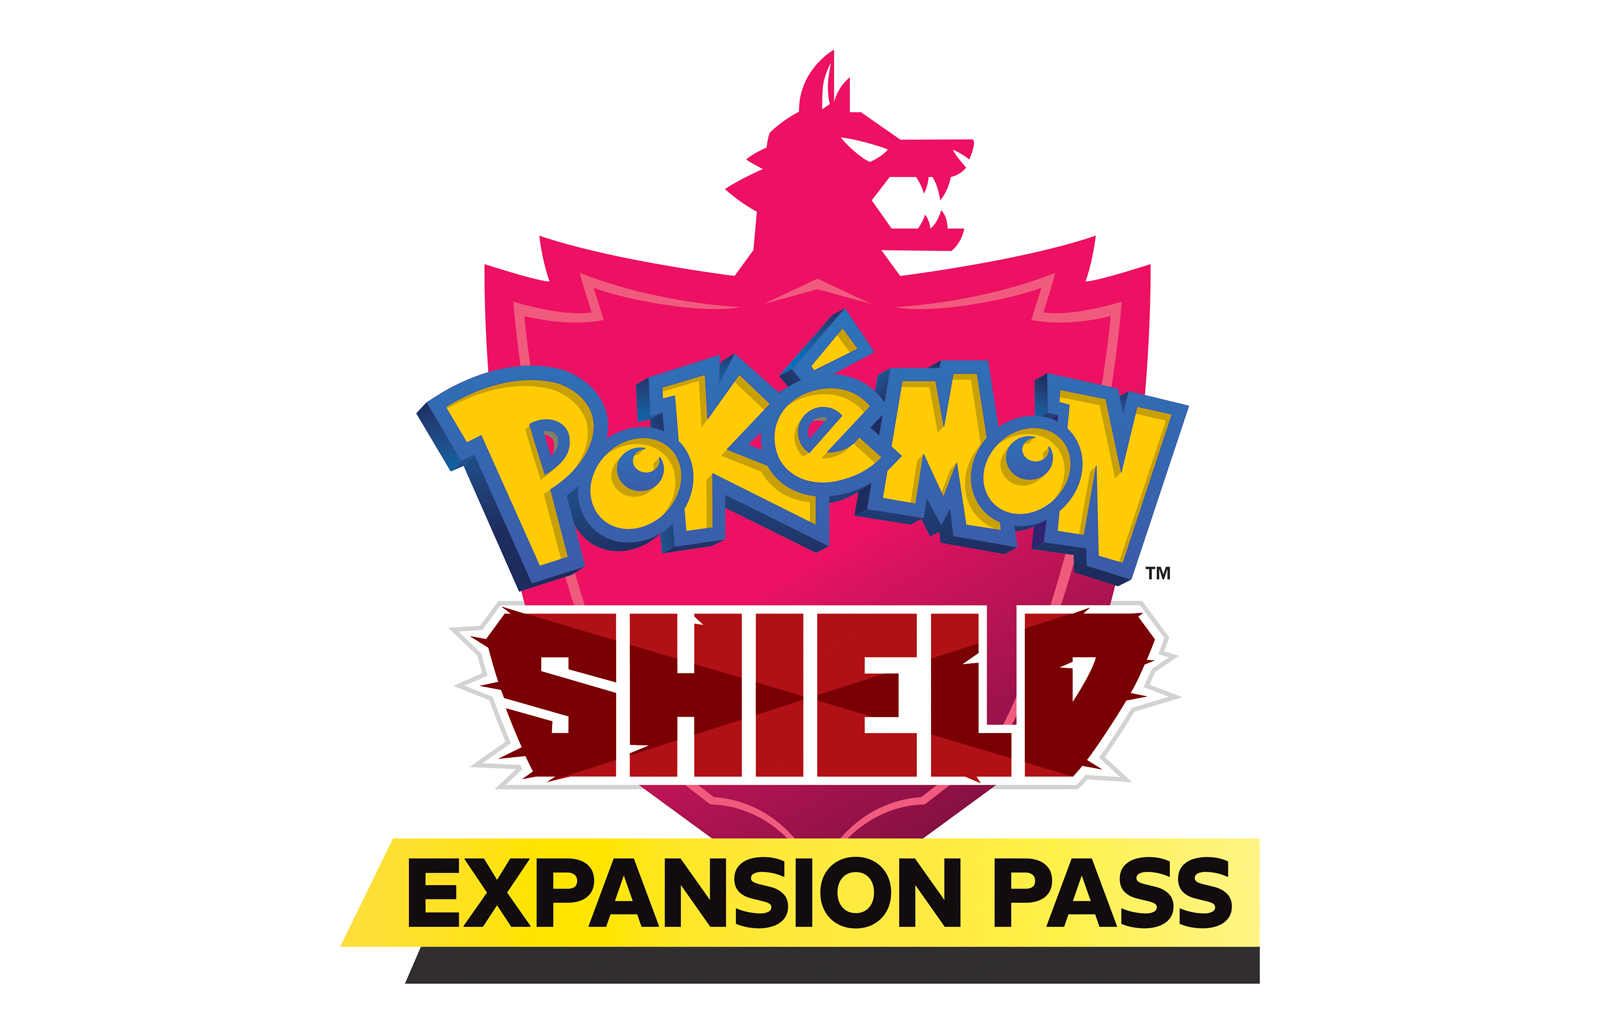 Pokemon Sword And Shield Version 1.1.0 Full Patch Notes Are Out